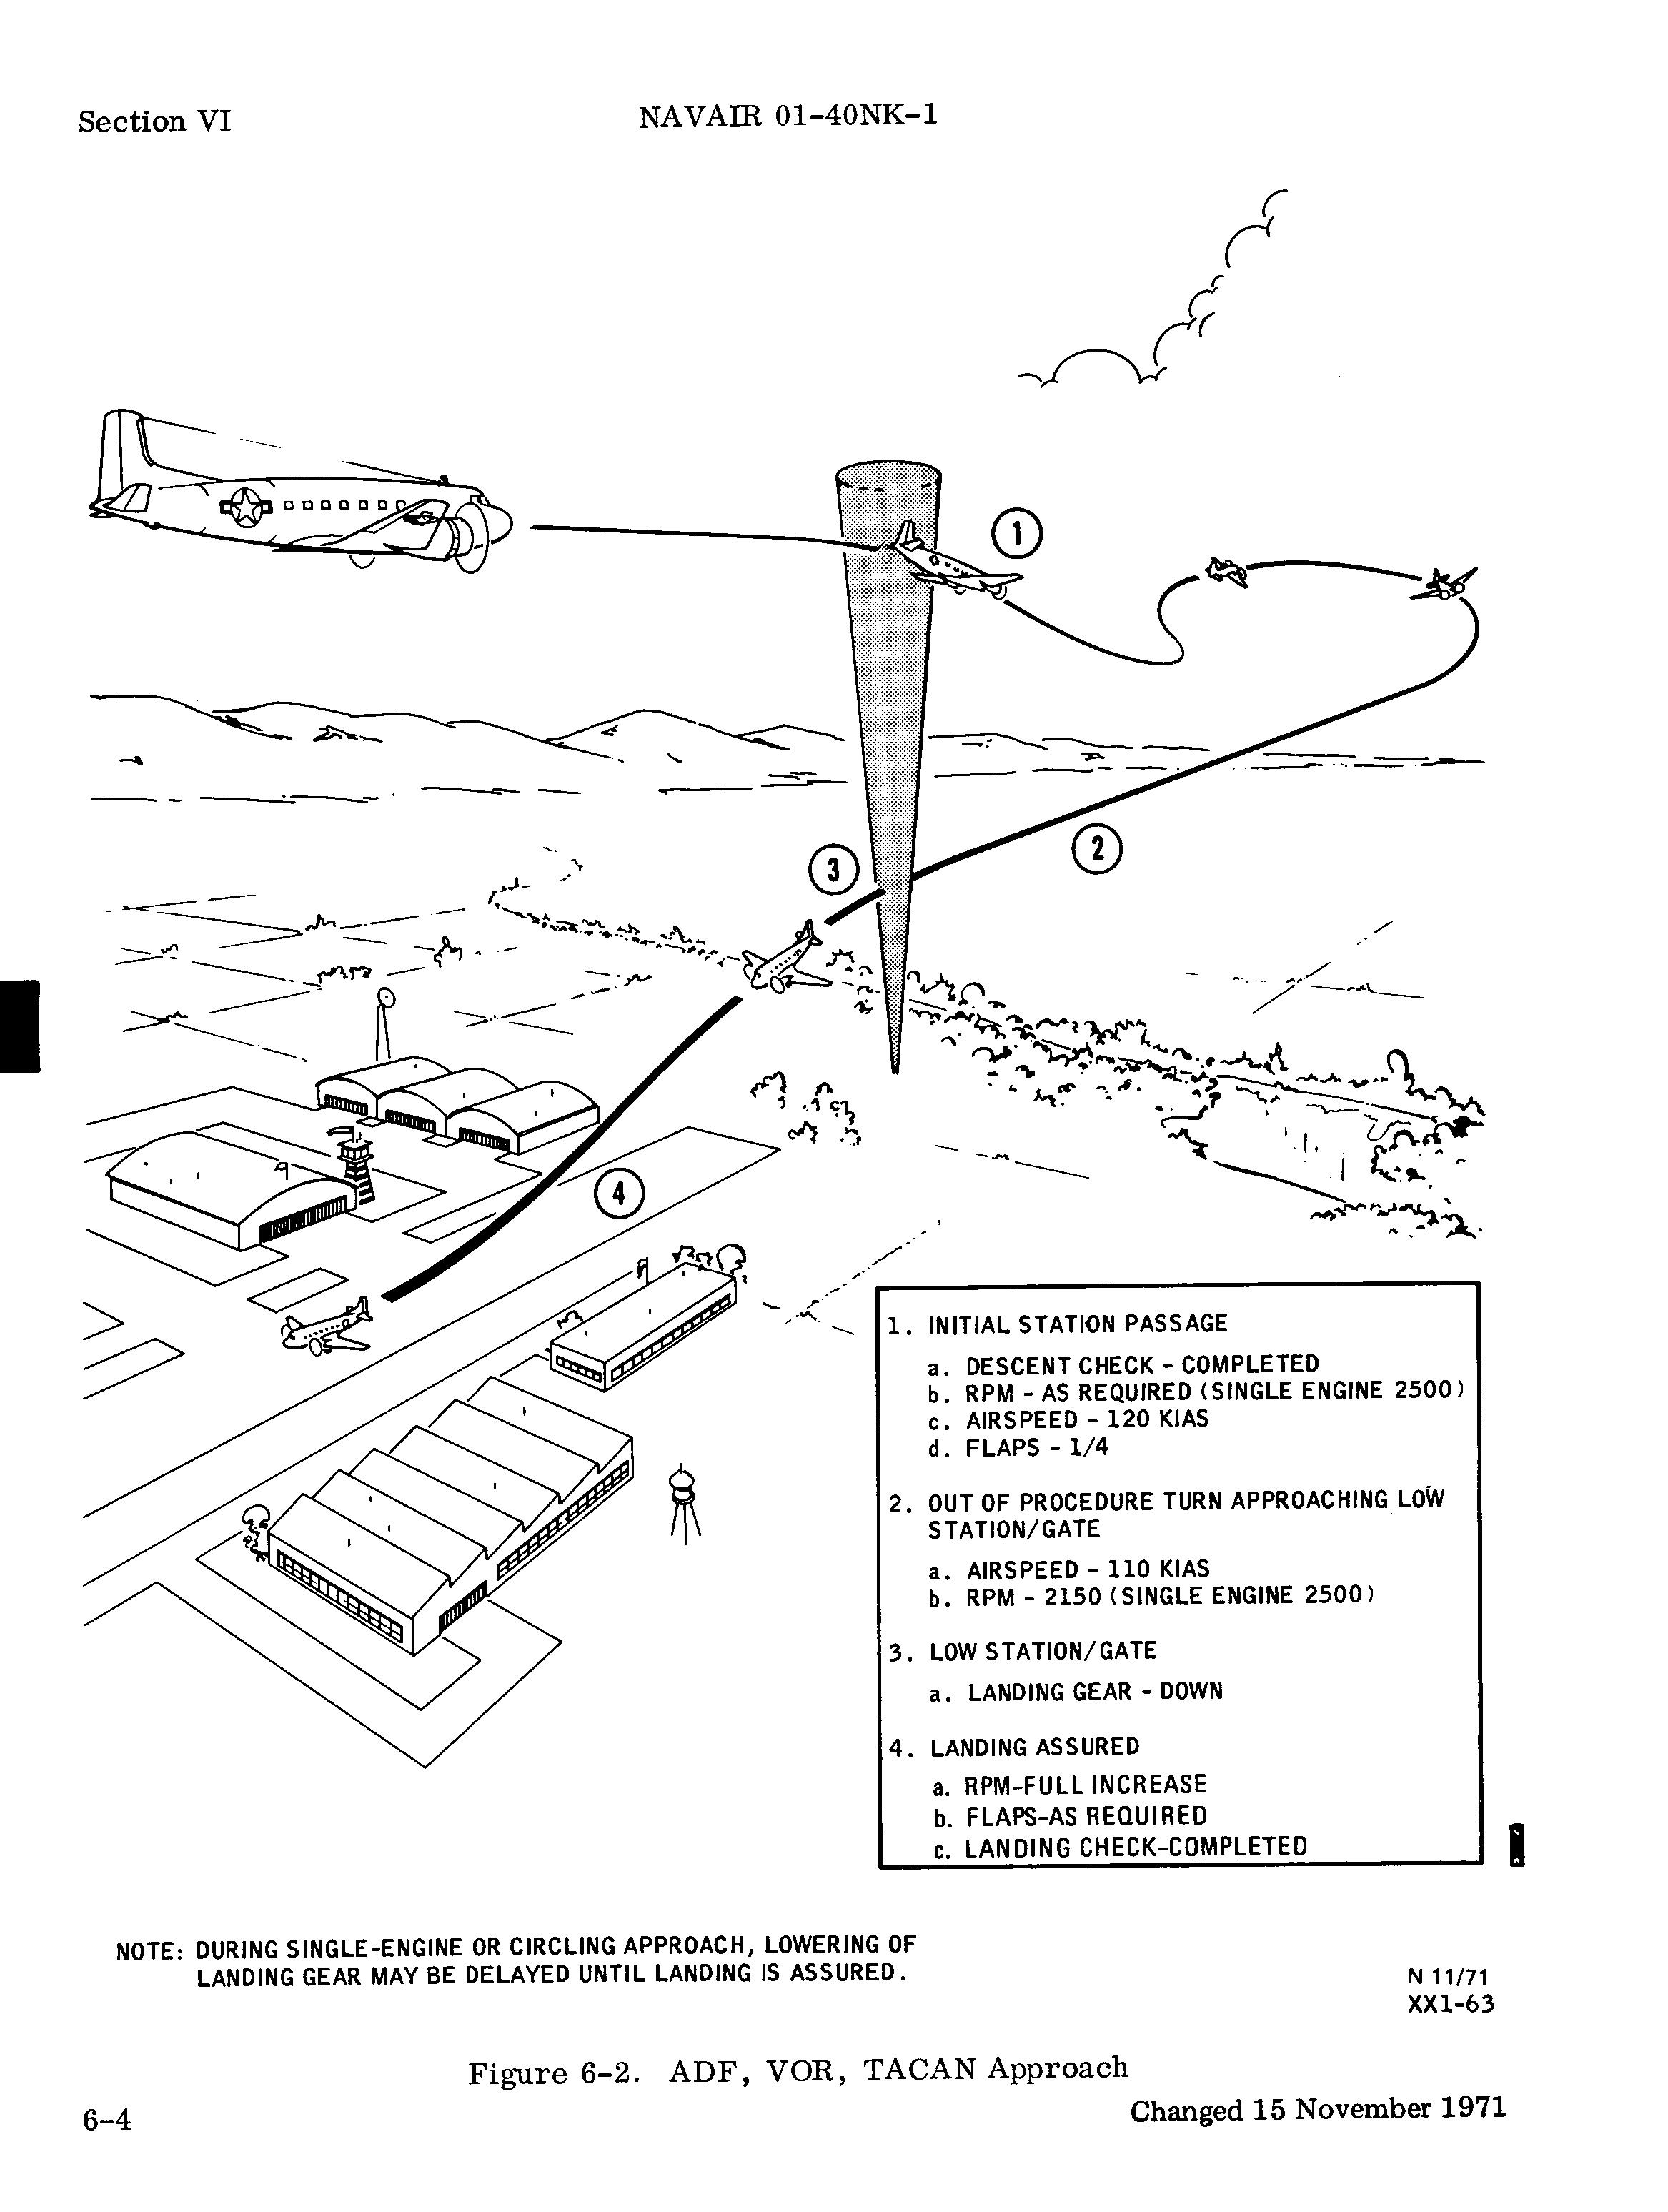 Sample page 154 from AirCorps Library document: NATOPS Flight Manual for Navy Model C-117D Aircraft